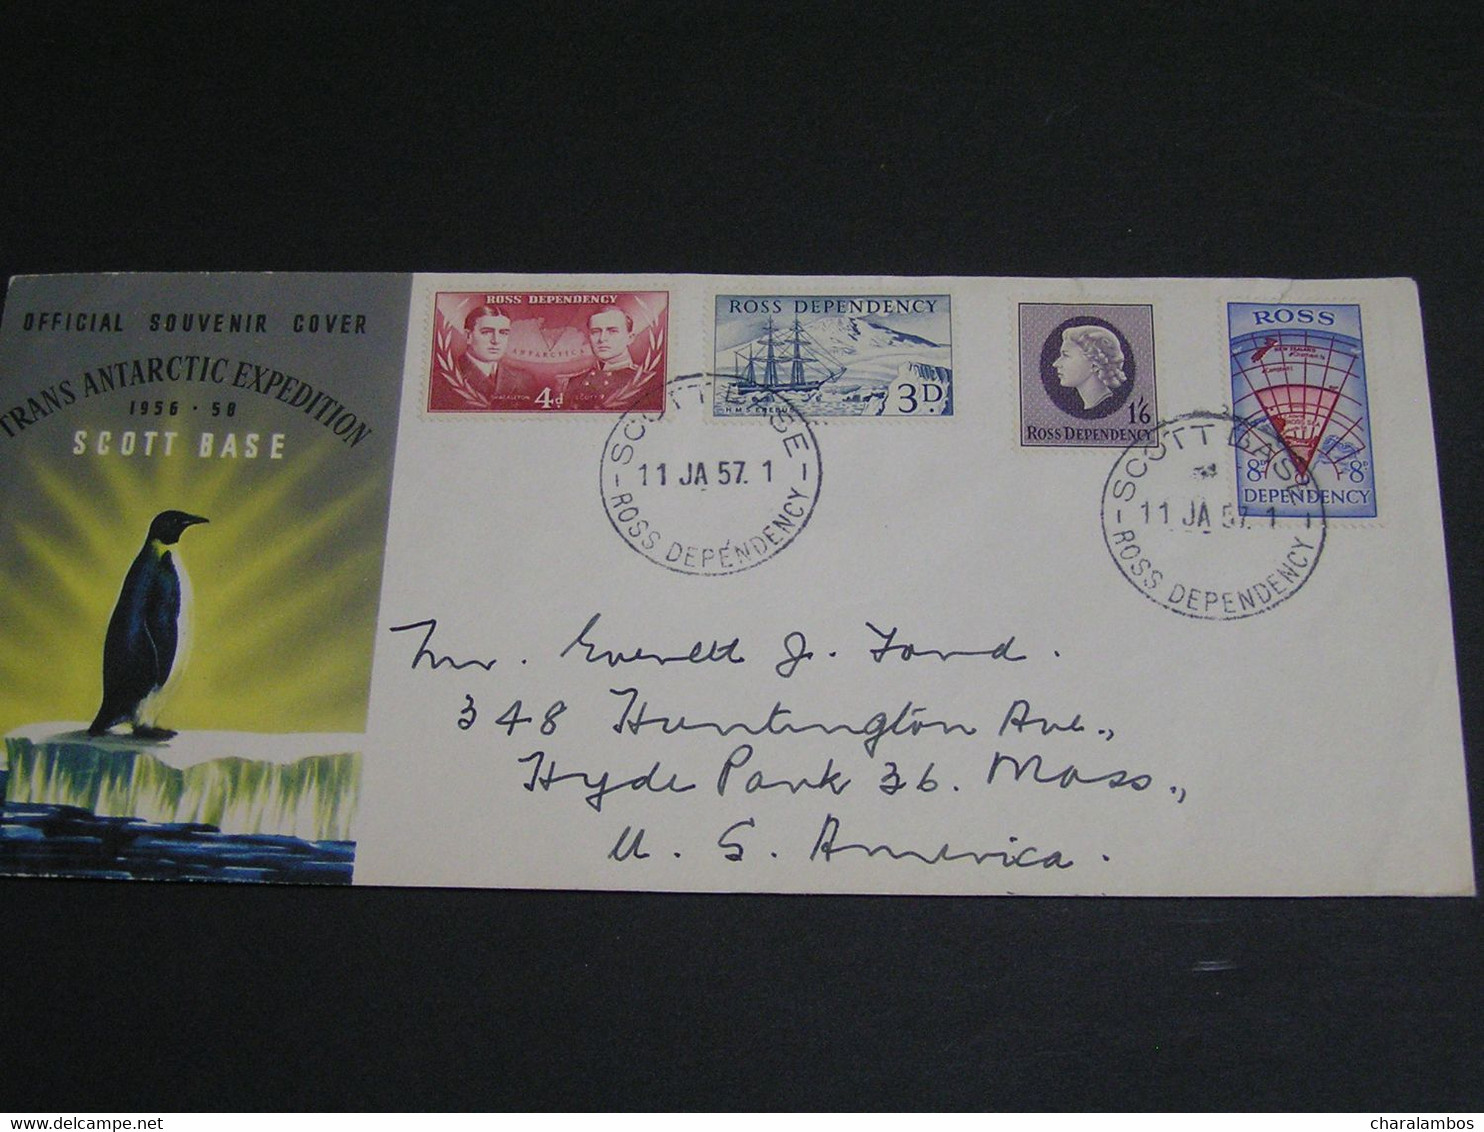 ROSS DEPENDENCY 1957 SCOTT-BASE Trans Antarctic Expedition; - FDC